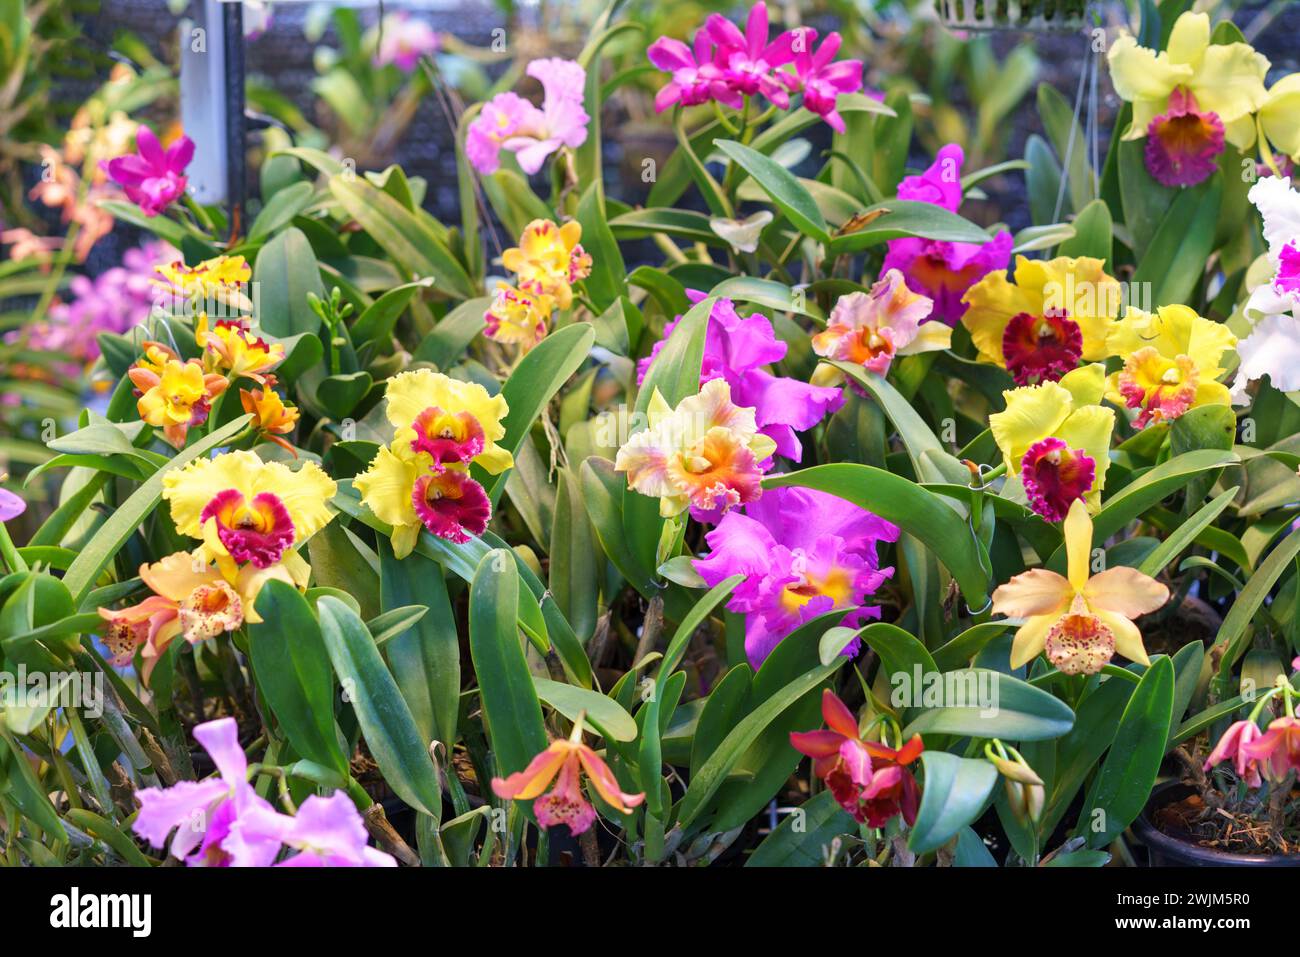 A stunning collection of Cattleya orchids in a variety of vibrant colors, in full bloom within a lush greenhouse setting Stock Photo